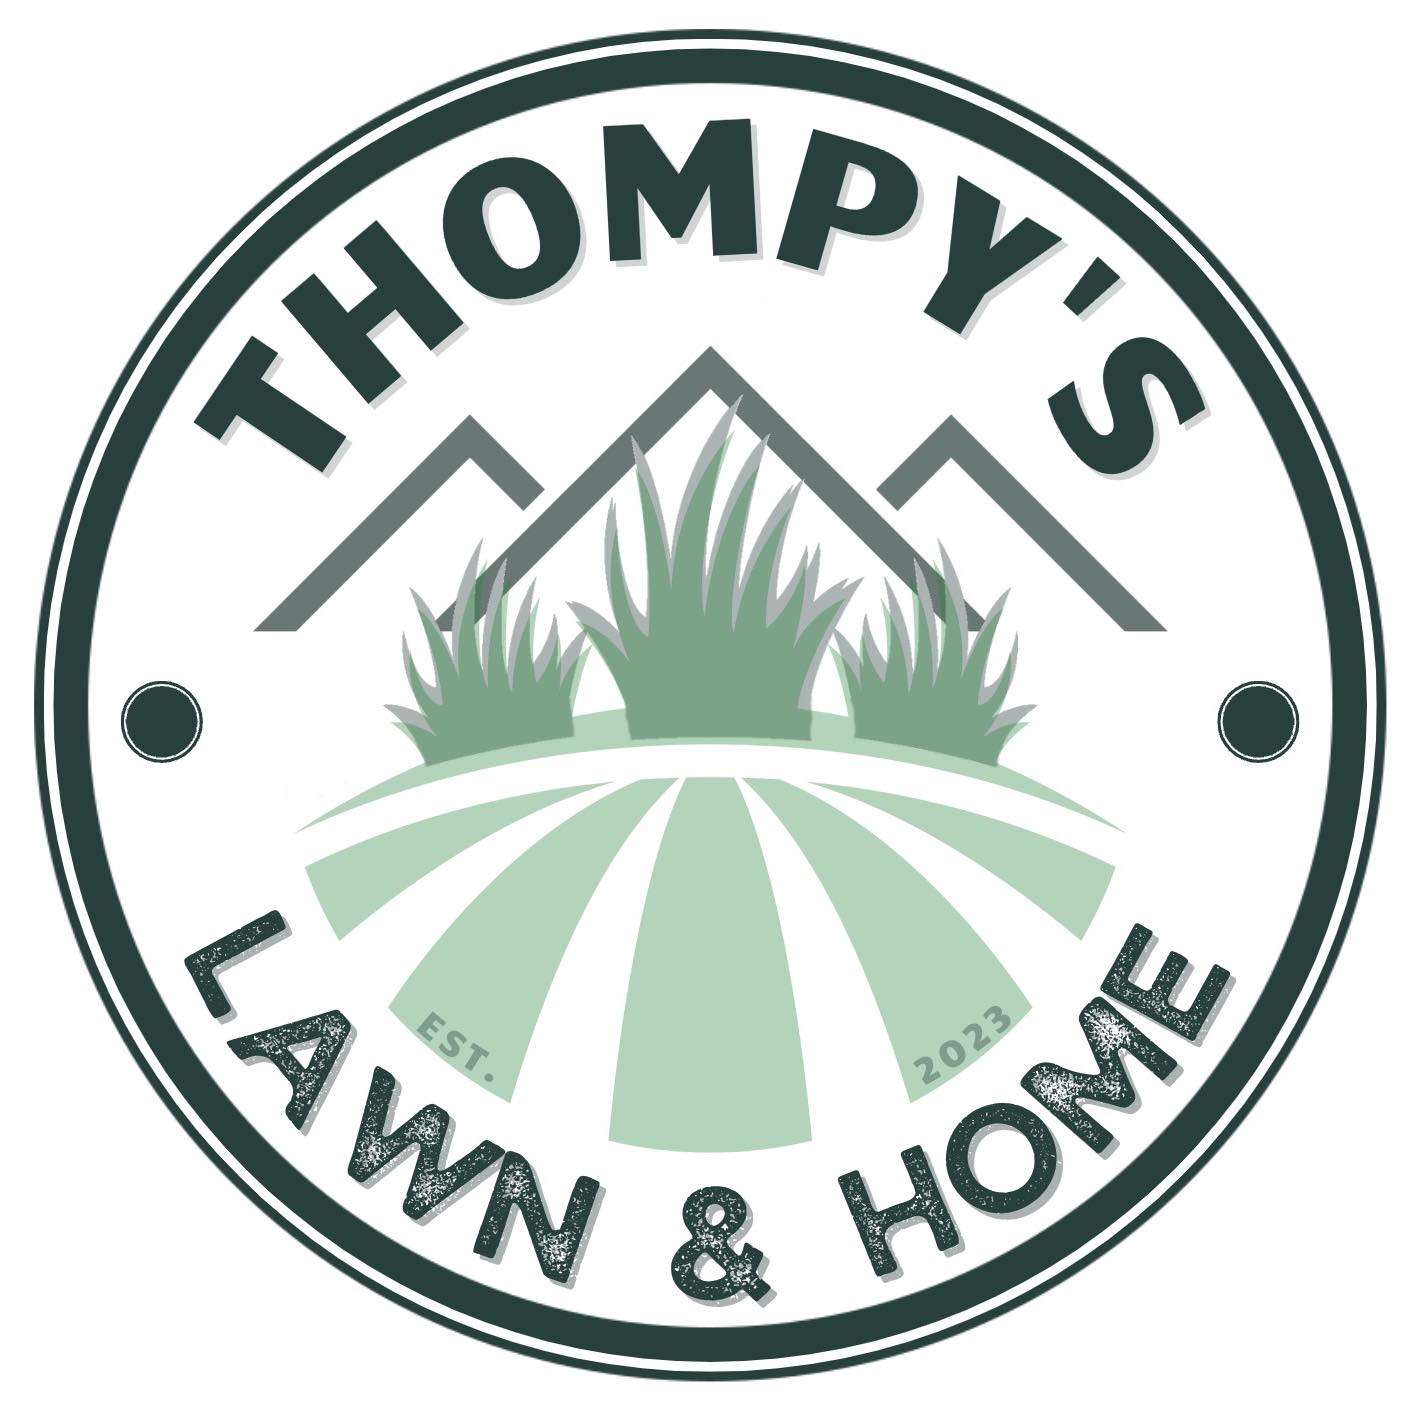 Thompy's Lawn & Home Services Logo